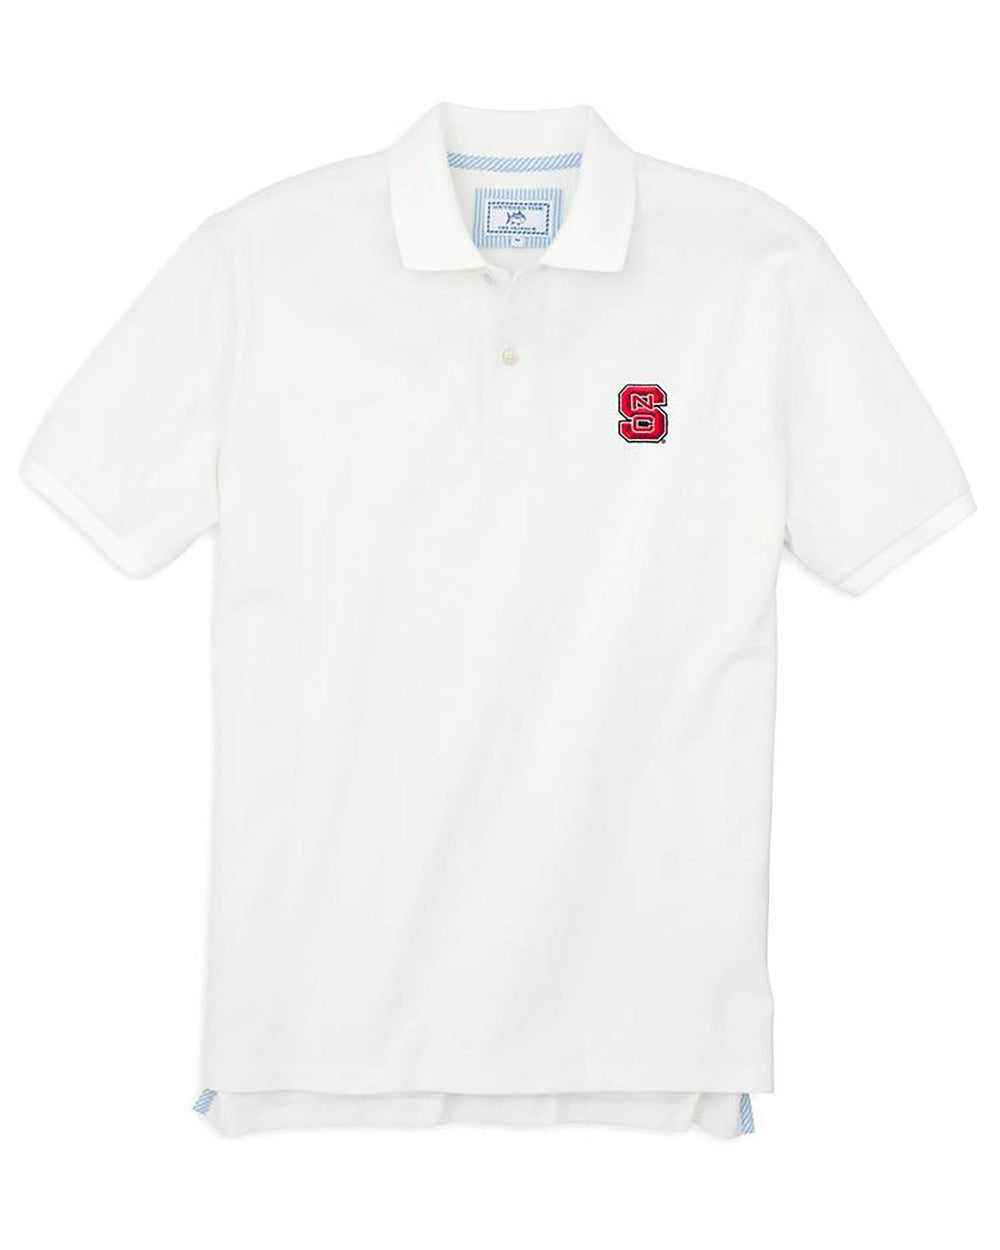 The front view of the Men's White NC State Wolfpack Pique Polo Shirt by Southern Tide - Classic White